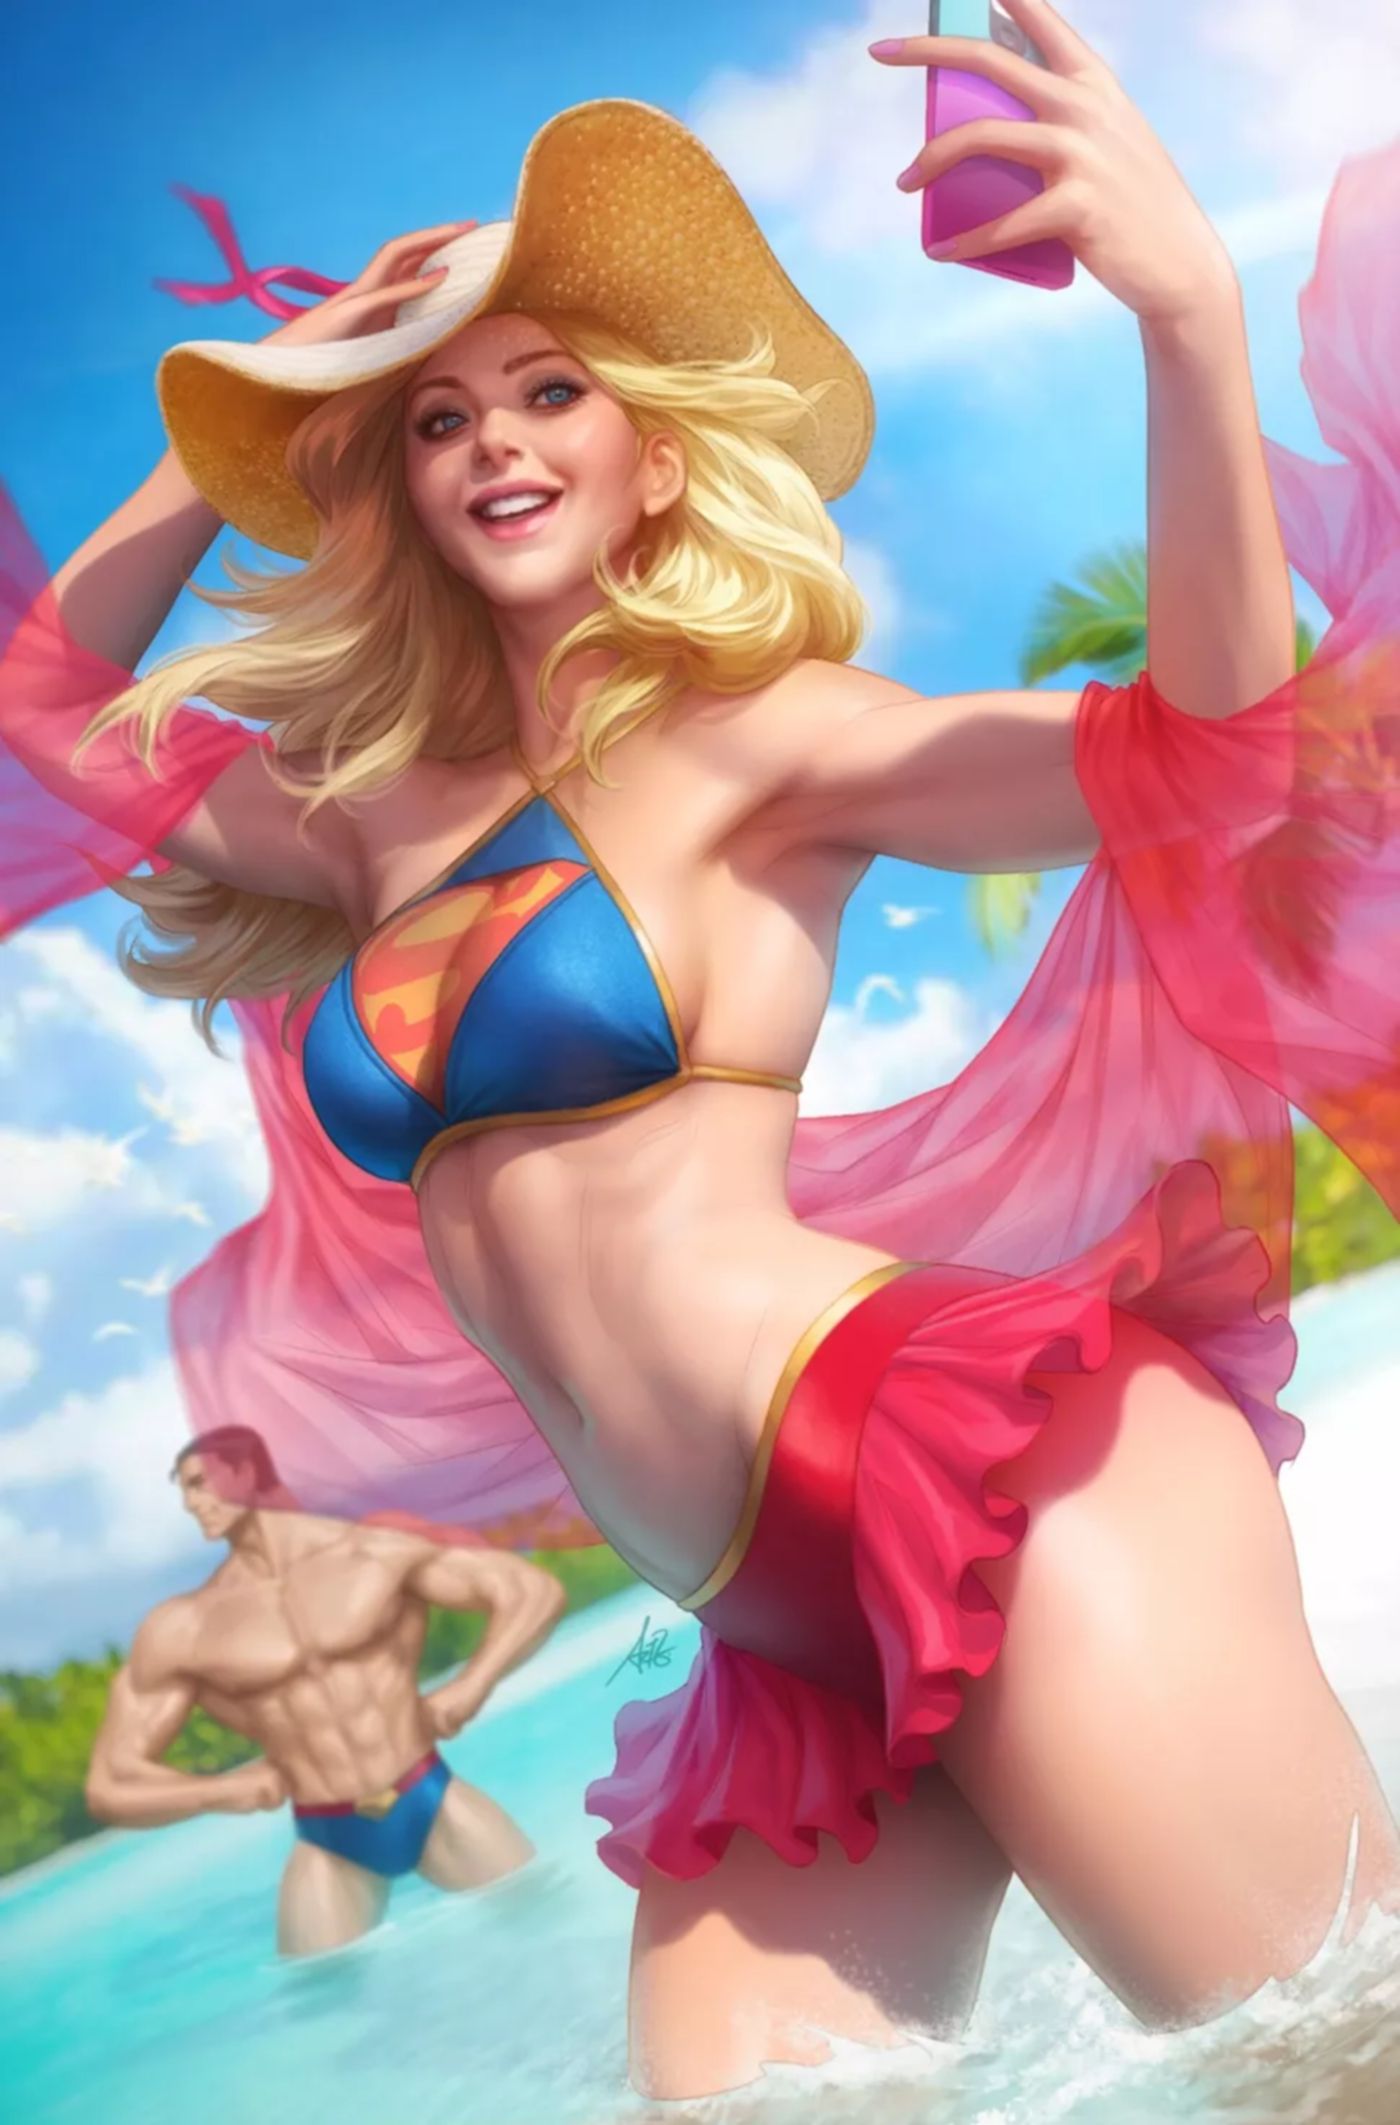 Batman, Harley Quinn, Superman & More Get Spicy Swimsuit Covers